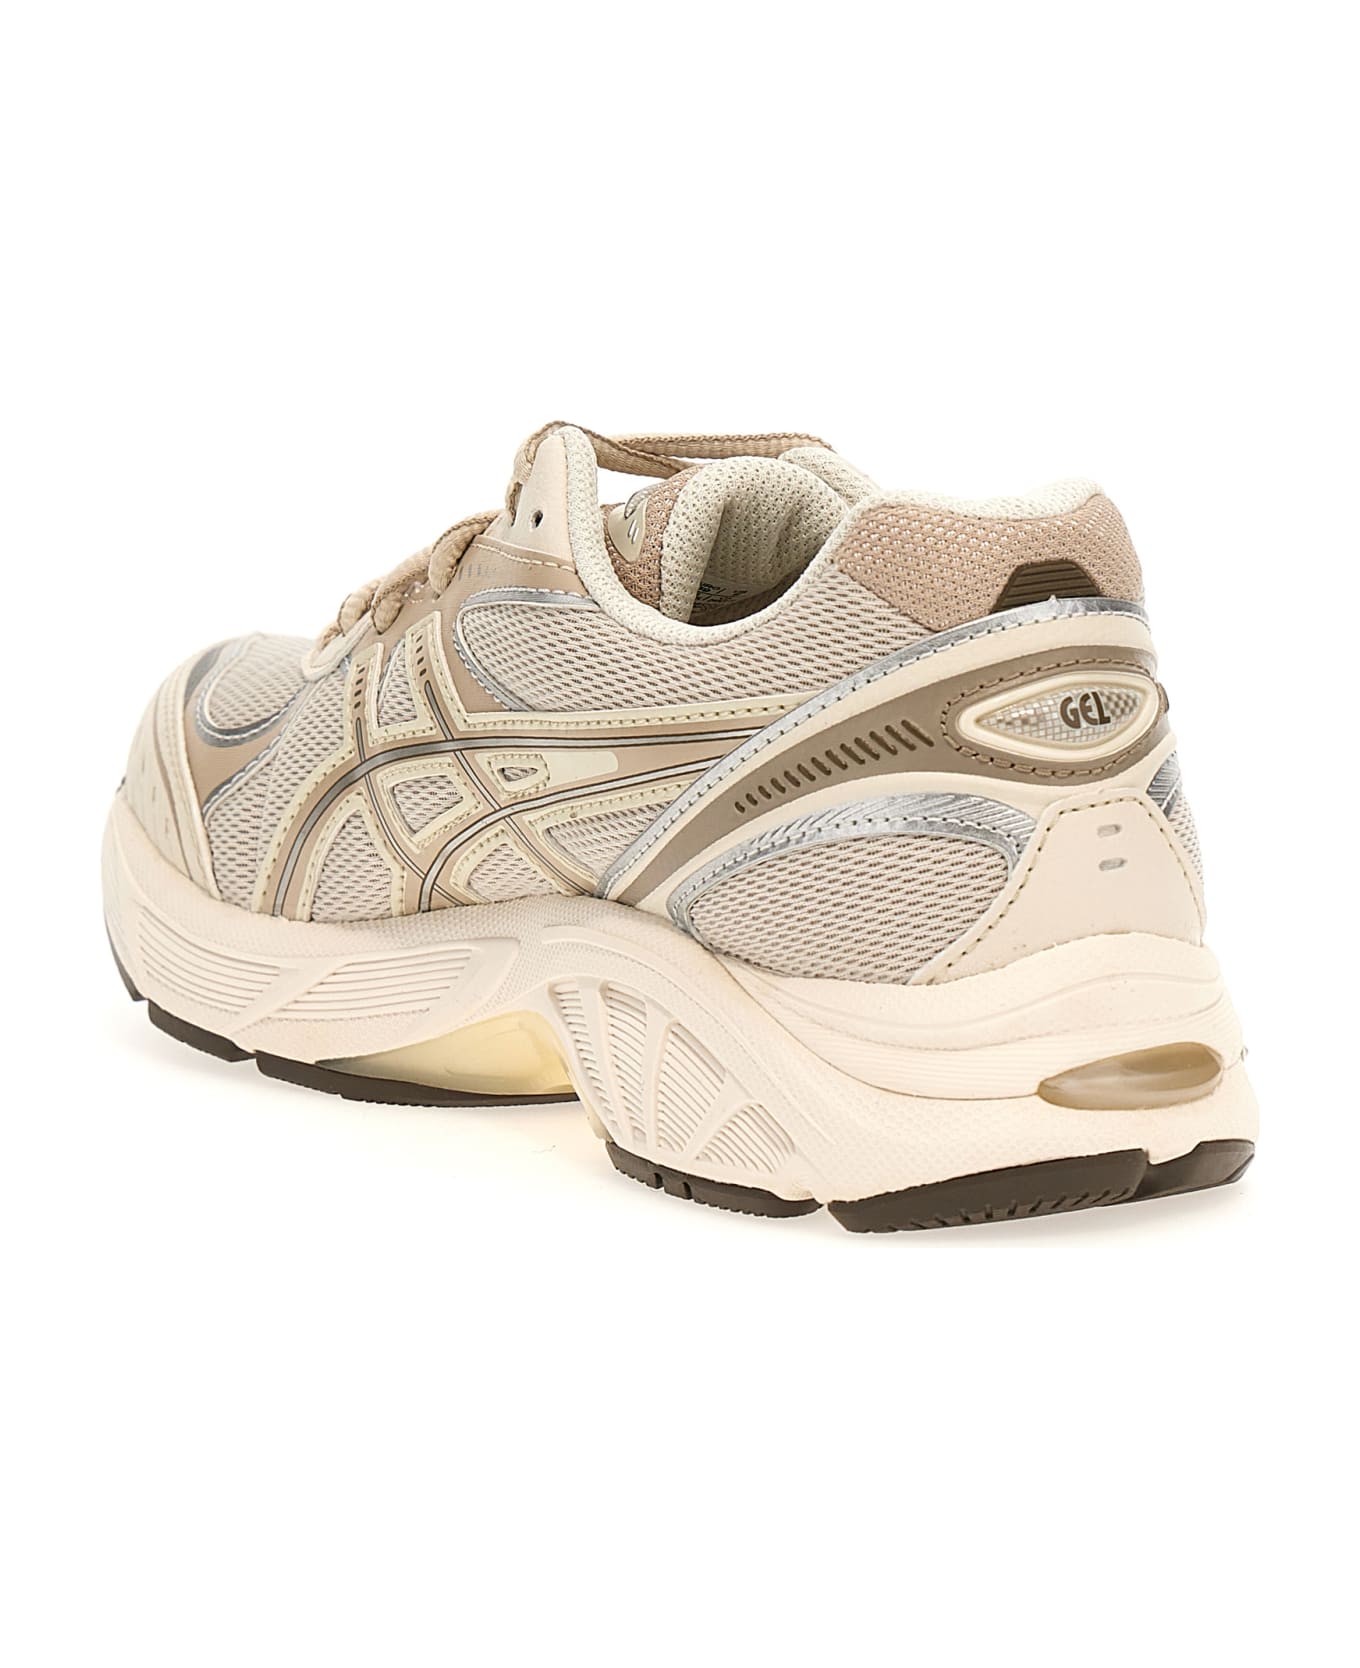 Asics 'gt-2160' Sneakers - Oatmeal/simply Taupe